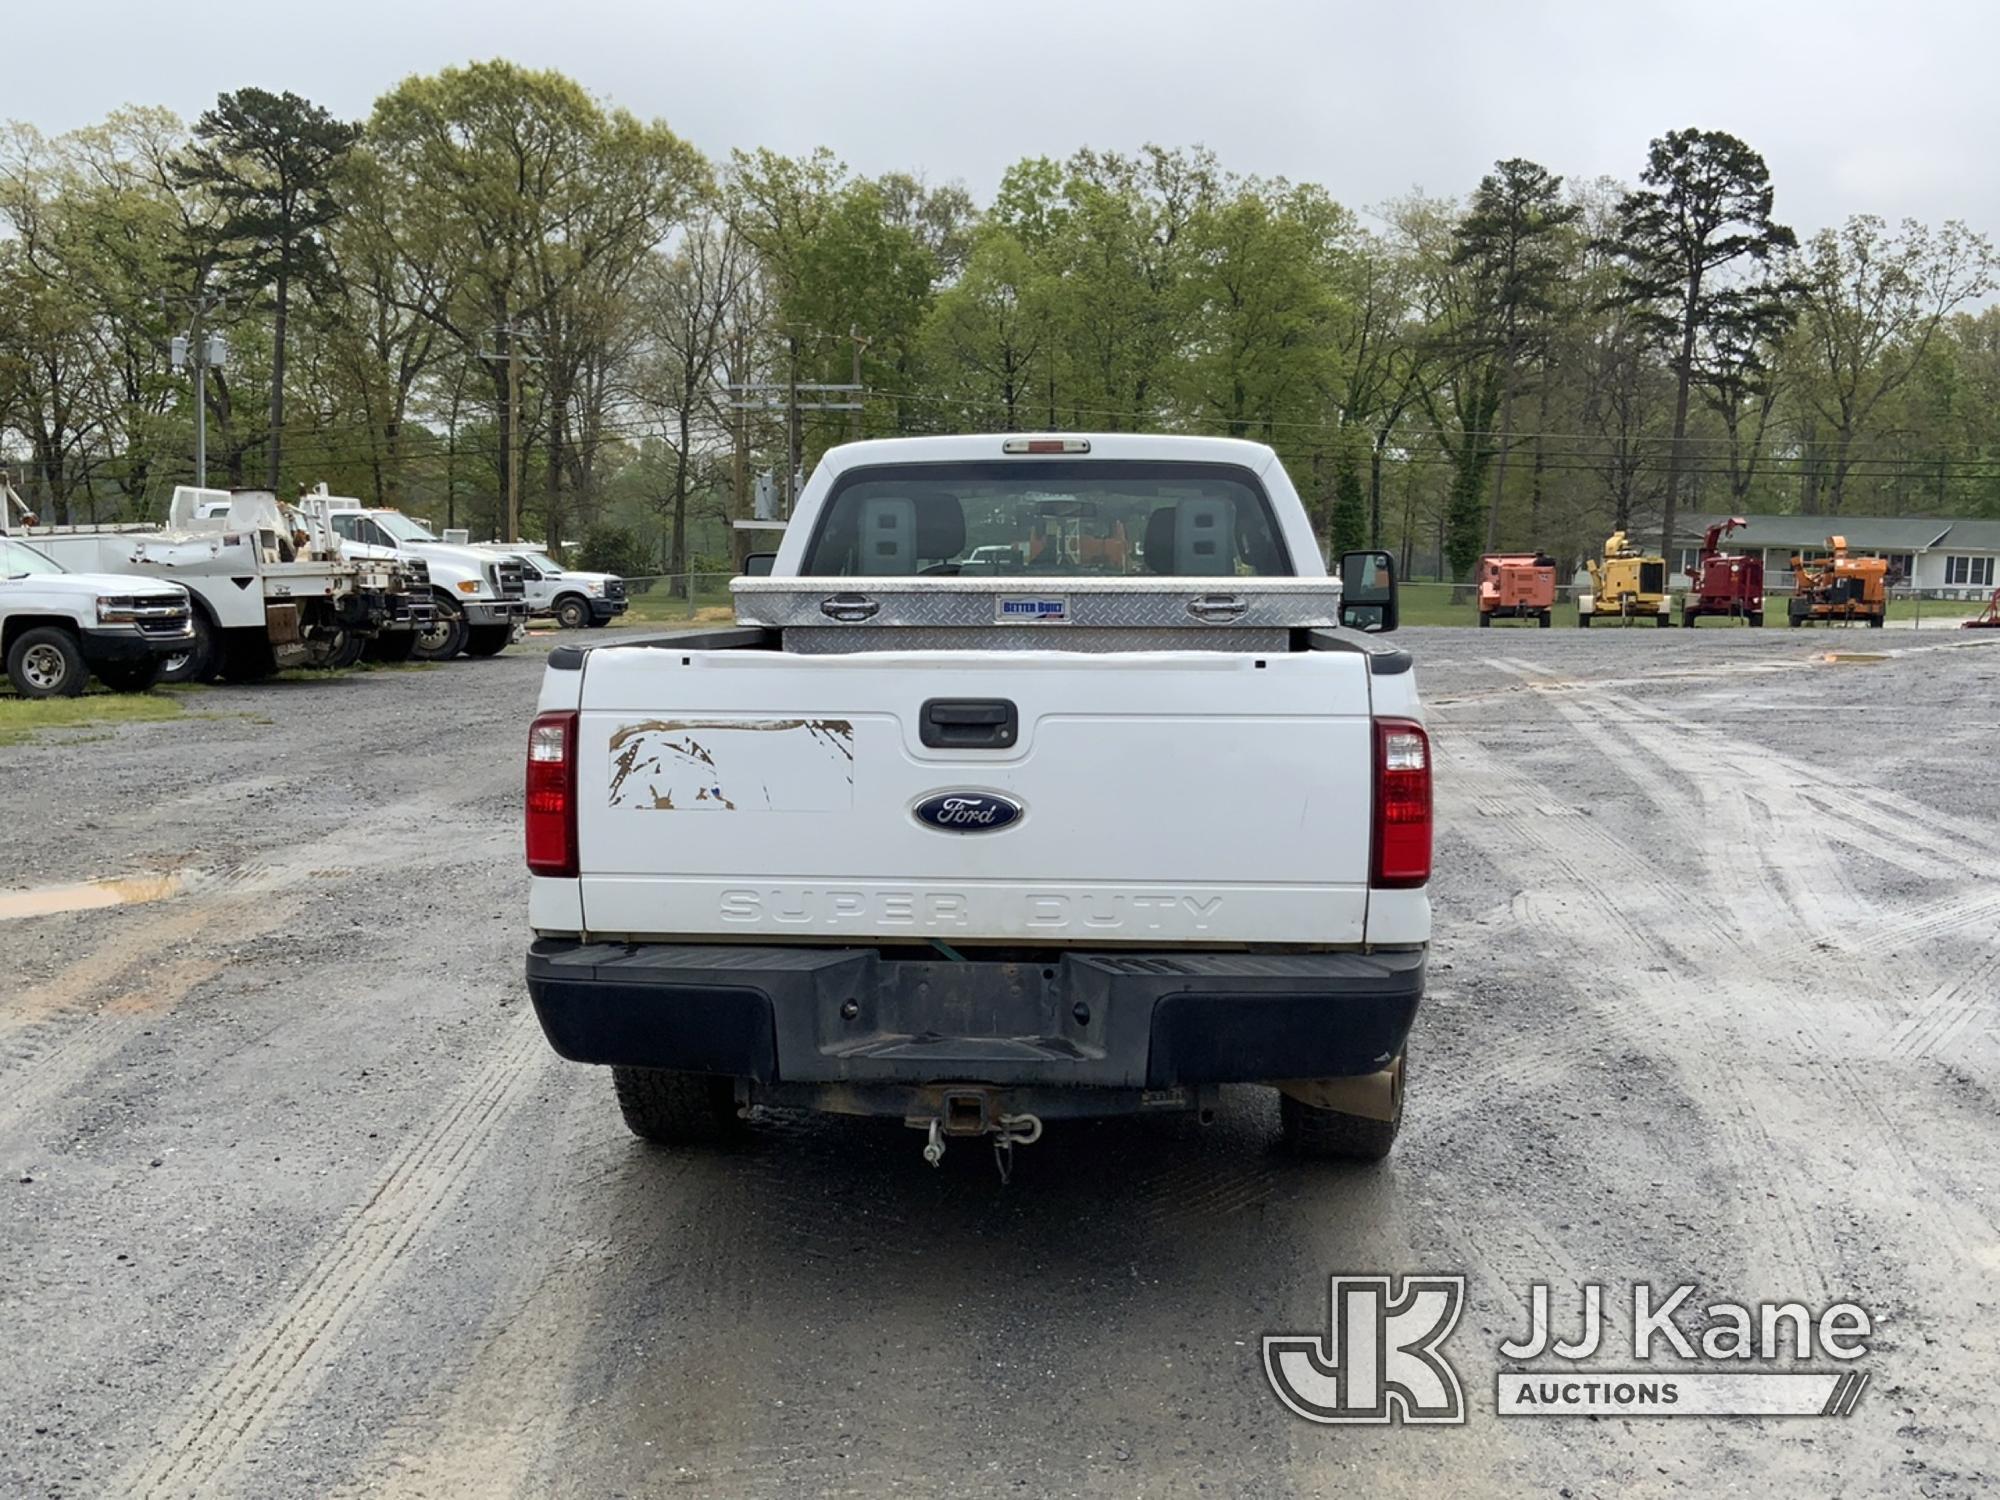 (Shelby, NC) 2014 Ford F250 Extended-Cab Pickup Truck Runs, Moves, Check Engine Light On, Minor Body